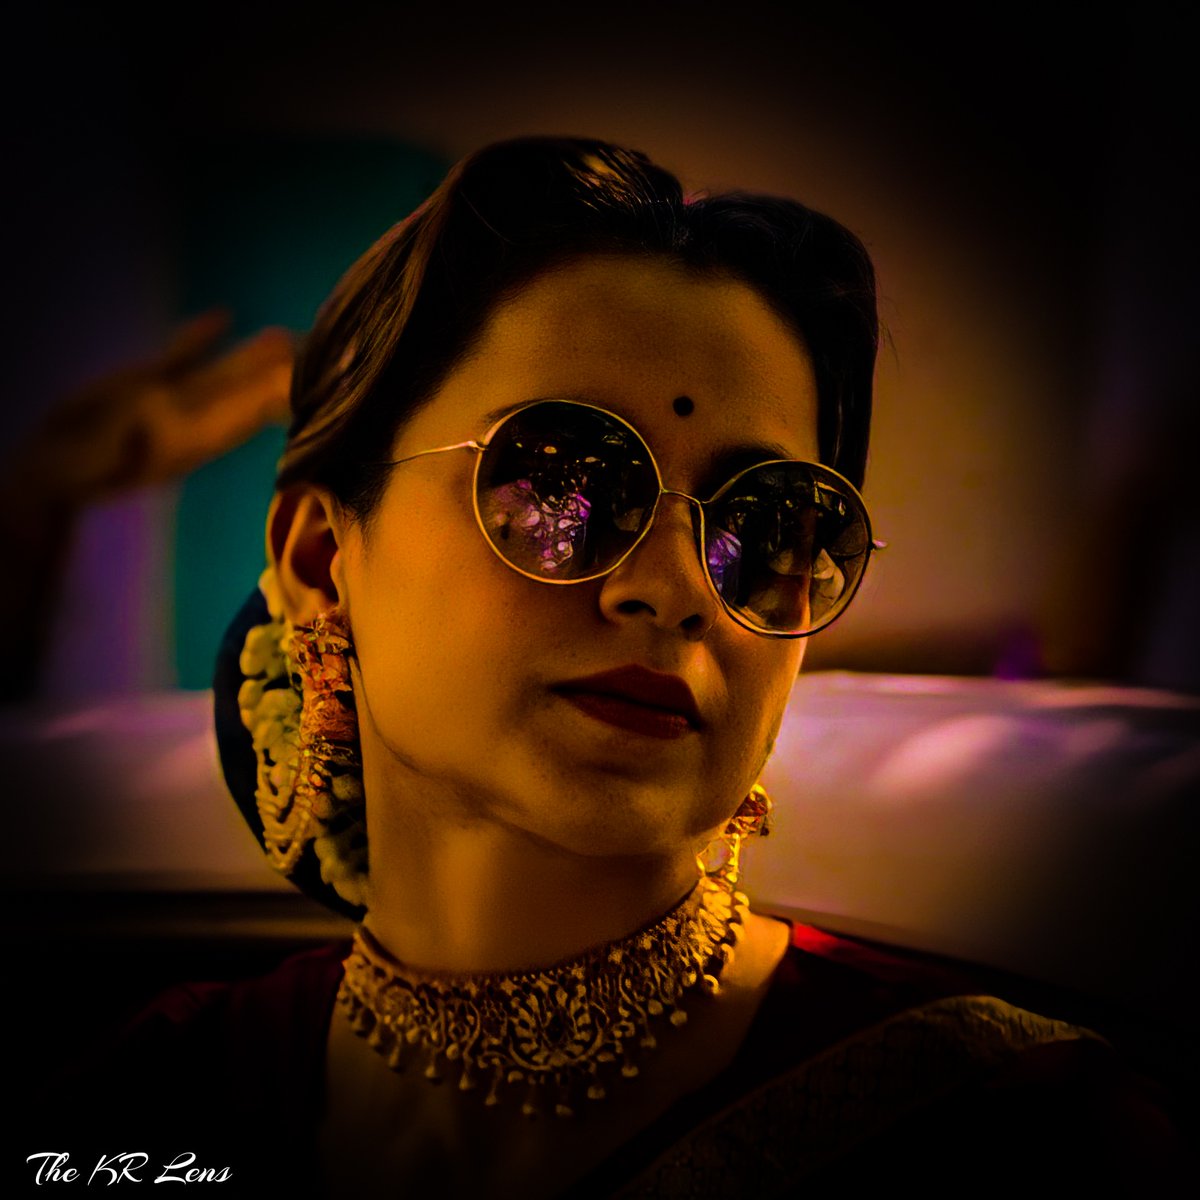 ♛ Kangana Ranaut ♛ is the Brightest Star of the Cine Galaxy.
She shines her own light,
Follows her own path
And
Doesn't worry about the Darkness,
For that is when she shines the Brightest.

THALAIVI TRAILER WON HEARTS.

#Thalaivi #ThalaiviTrailer #KanganaRanaut